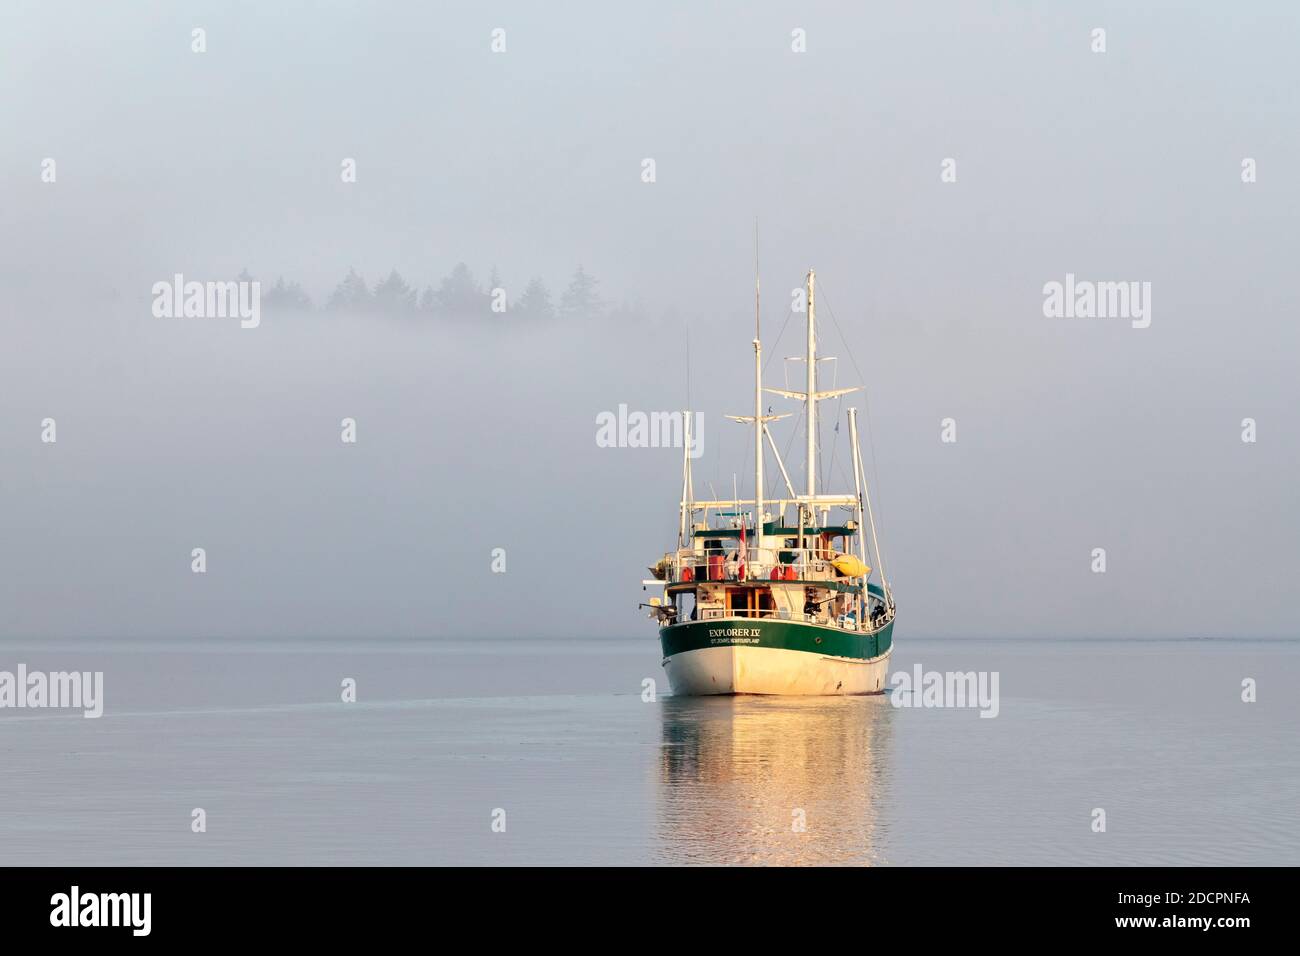 A pleasure cruiser (seen from astern) is underway on a bright foggy morning, no landmarks visible except the tops of tall trees on the shore ahead. Stock Photo